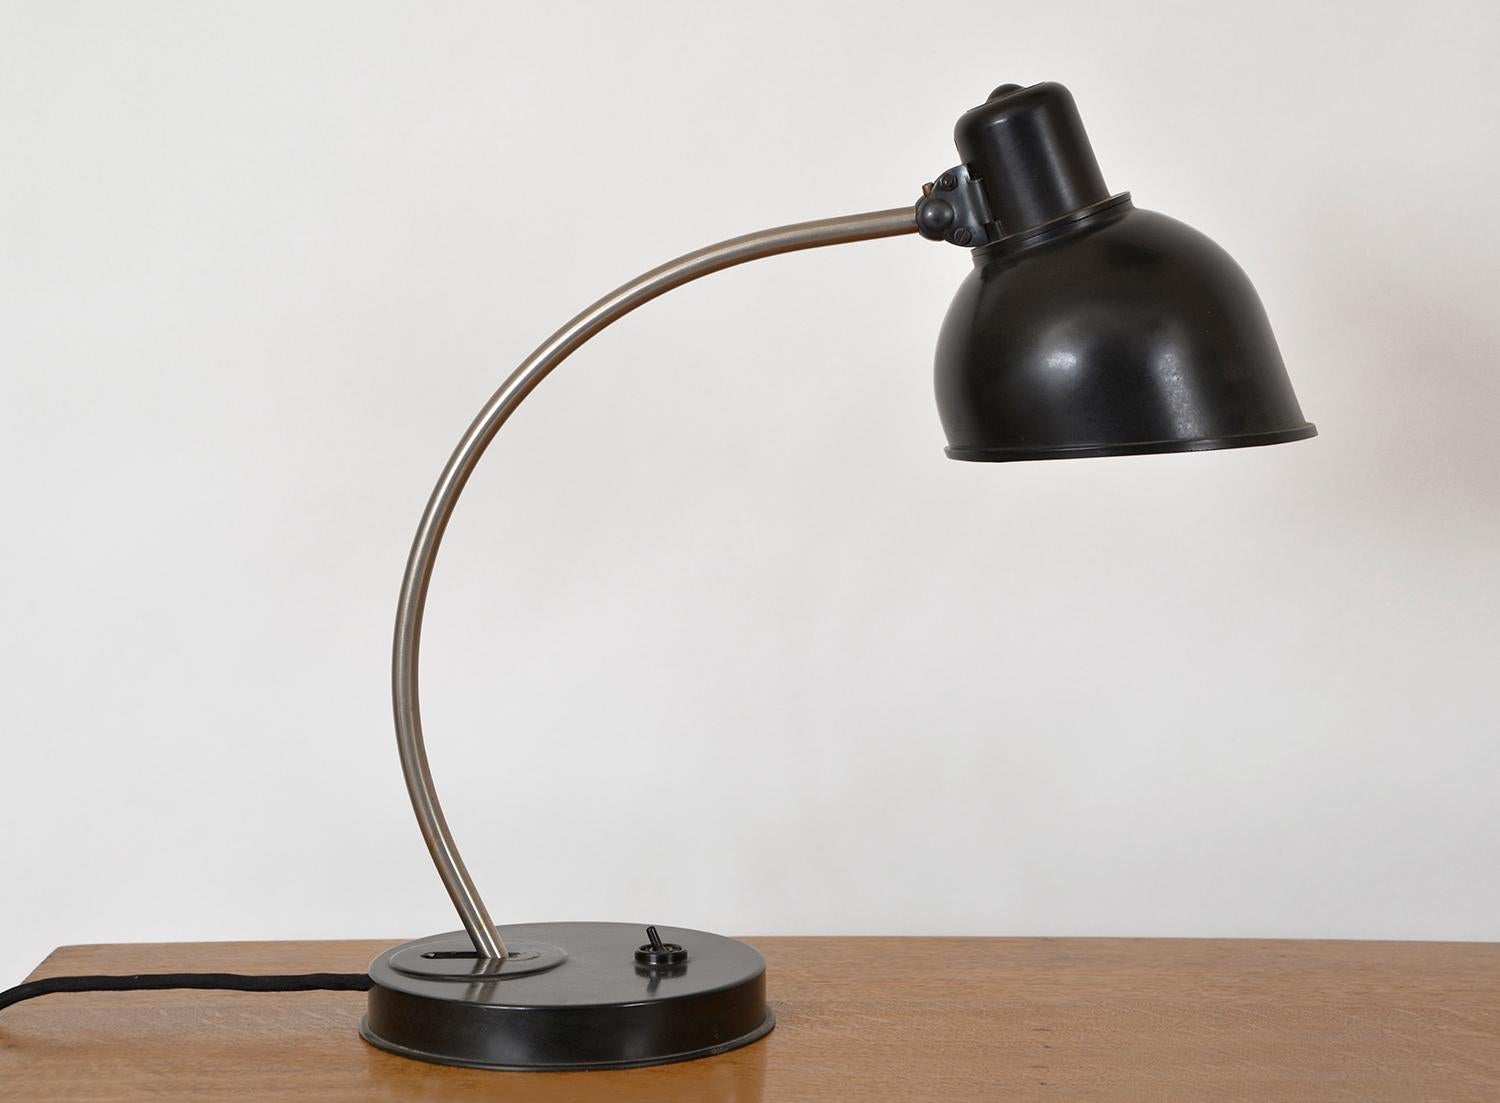 1950s desk lamp designed for Helion VEB Leuchtenbau in the city of Arnstadt, East Germany, unusually with both a Bakelite shade and base, articulated by a brushed steel curved arm. The curved arm adjusts at the base and the lamp shade also pivots on